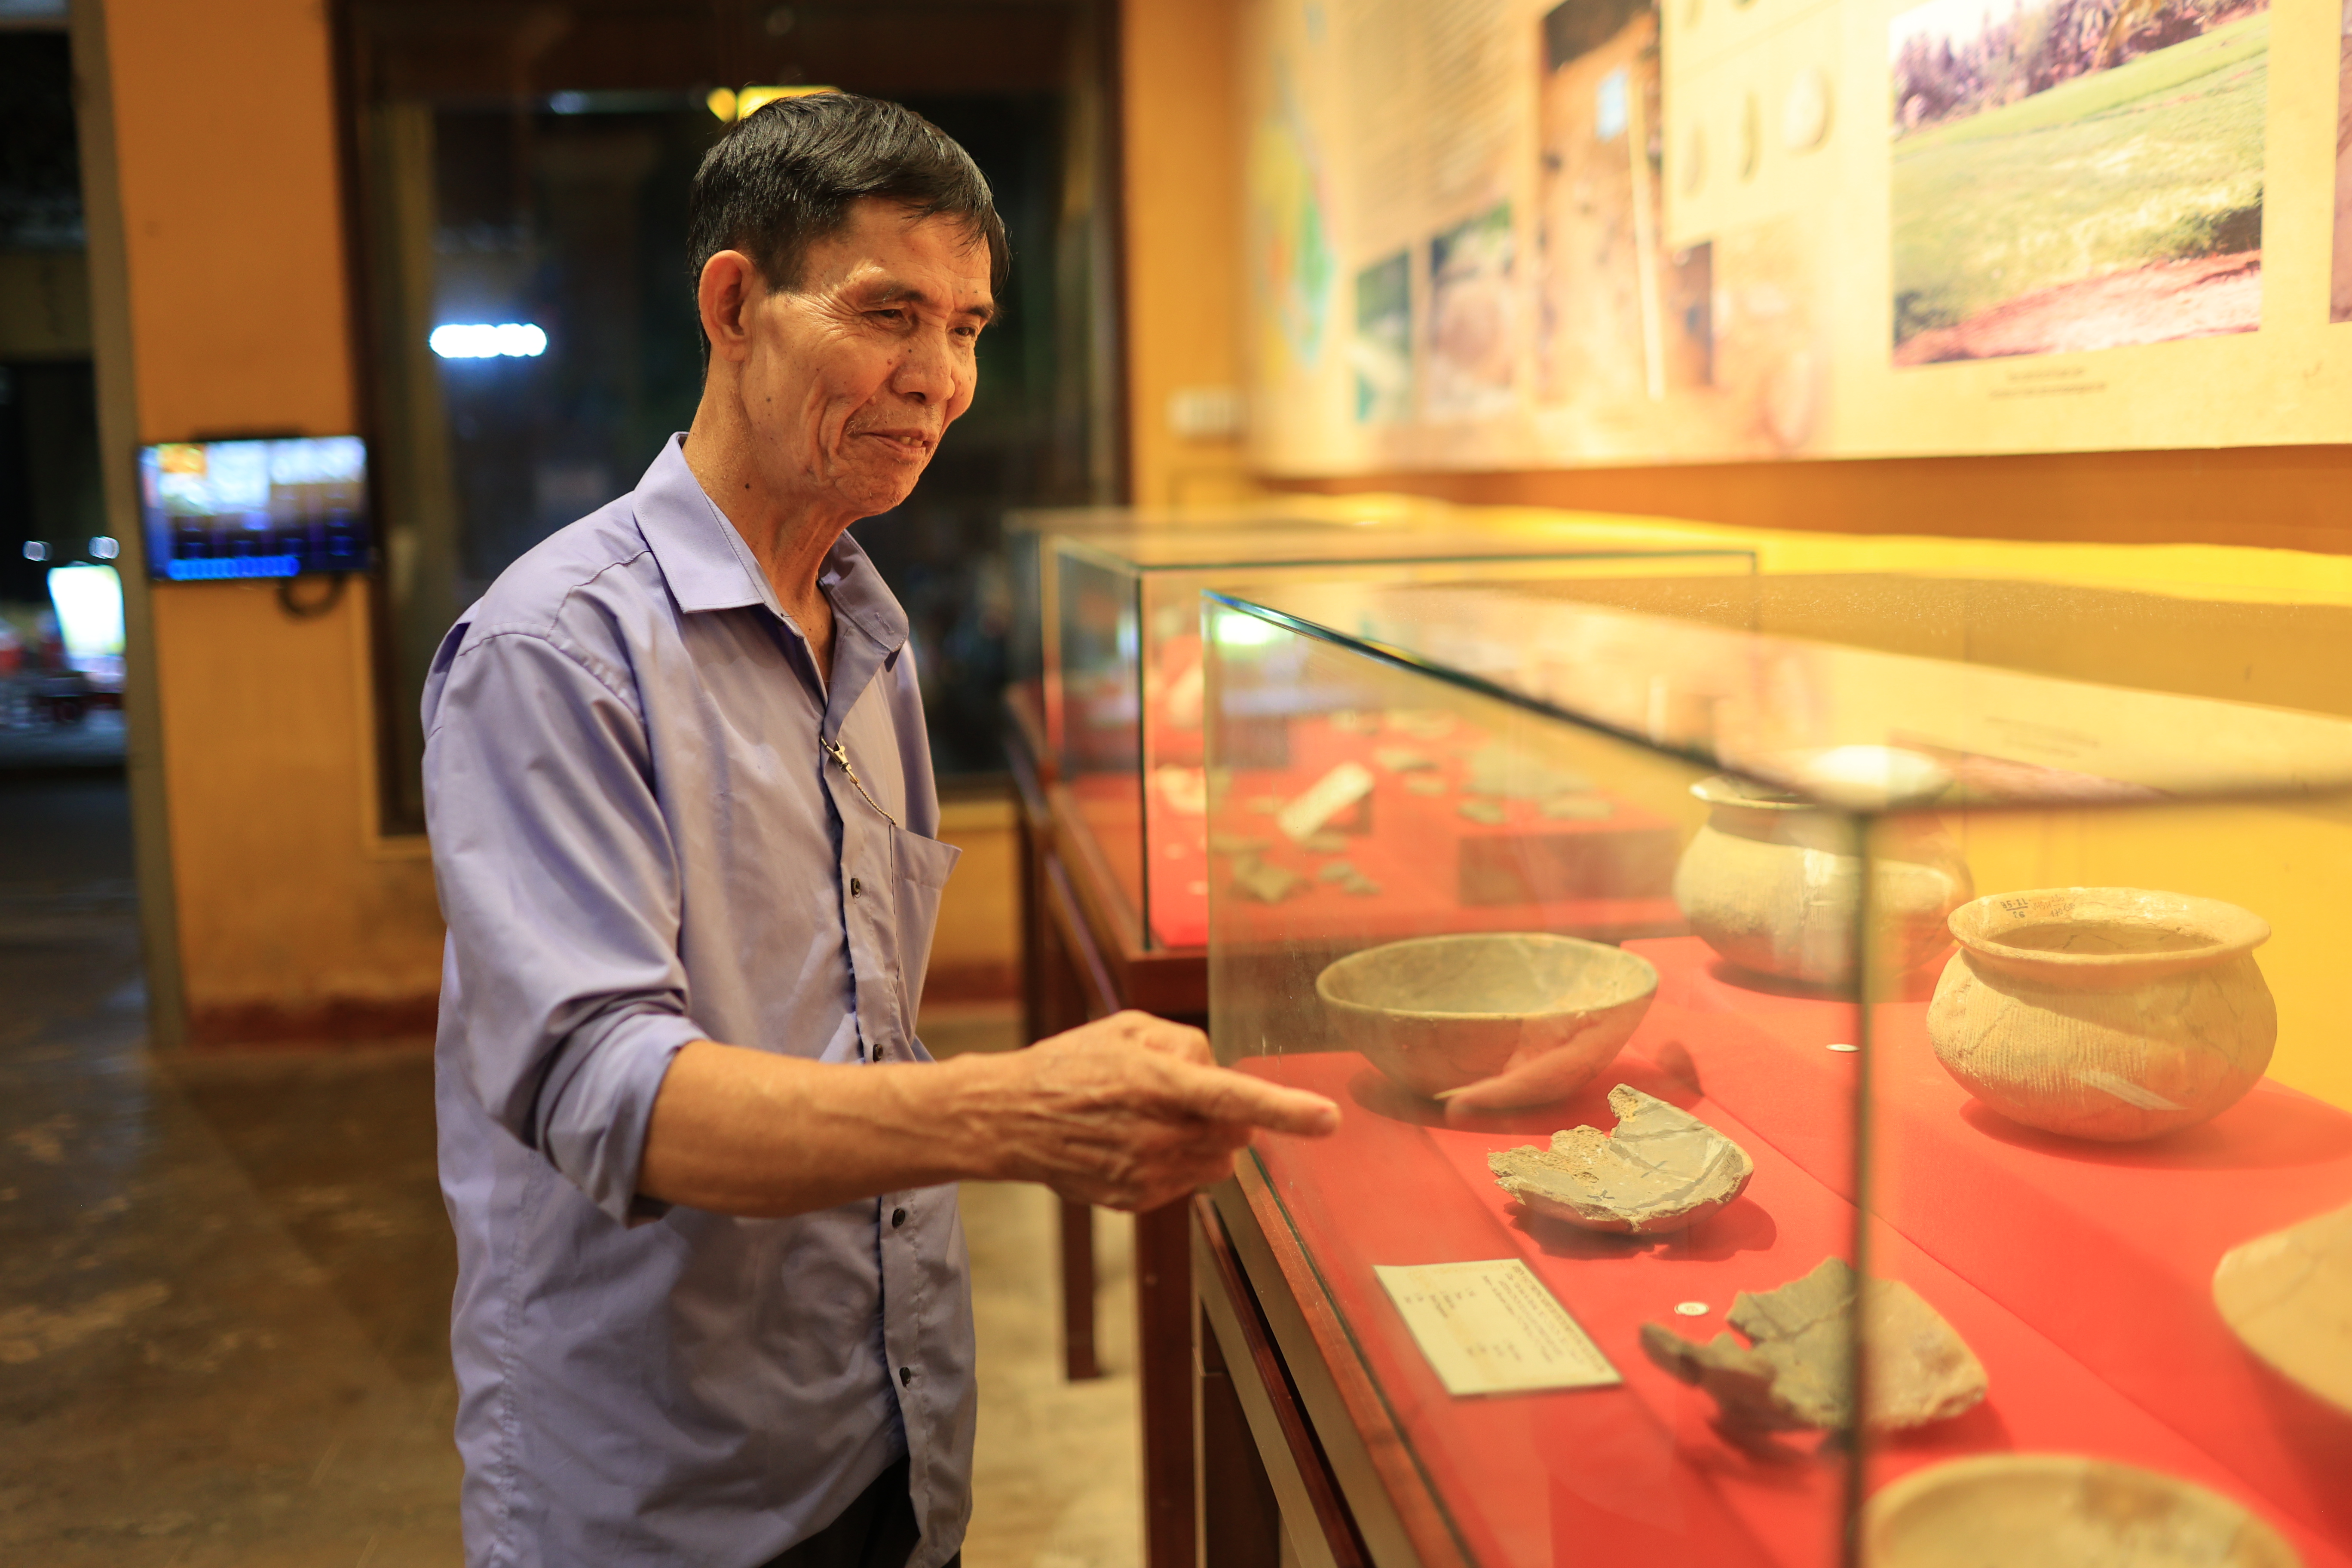 Chu Dinh Hoa visits a museum in Hoi An in April 2021. Photo: Hoang Tien Dat